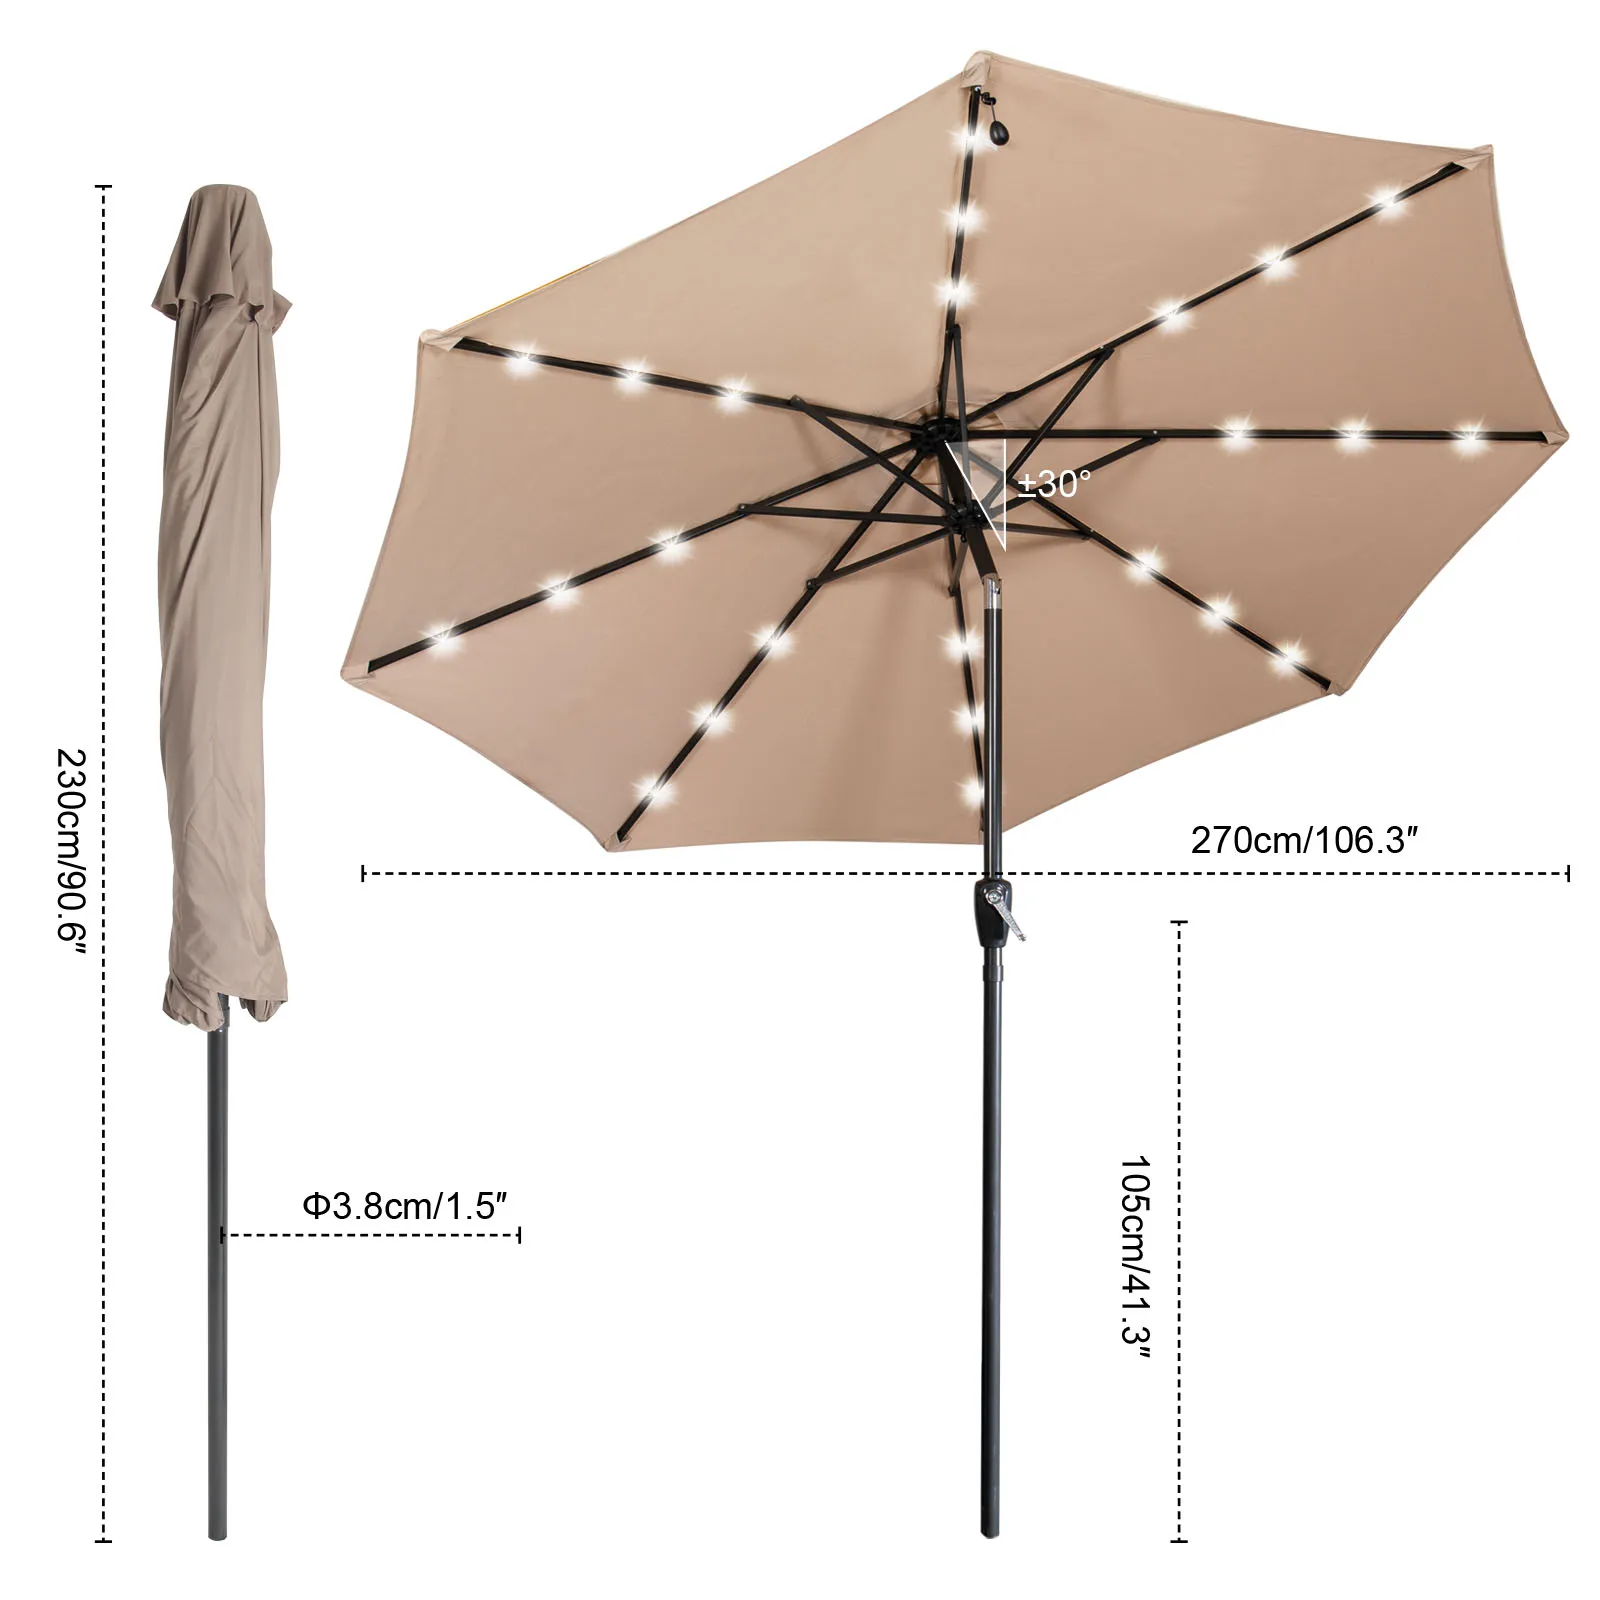 

【USA READY STOCK】2.7M Garden Parasol with Solar-Powered LED Lights, Patio Umbrella with 8 Sturdy Ribs